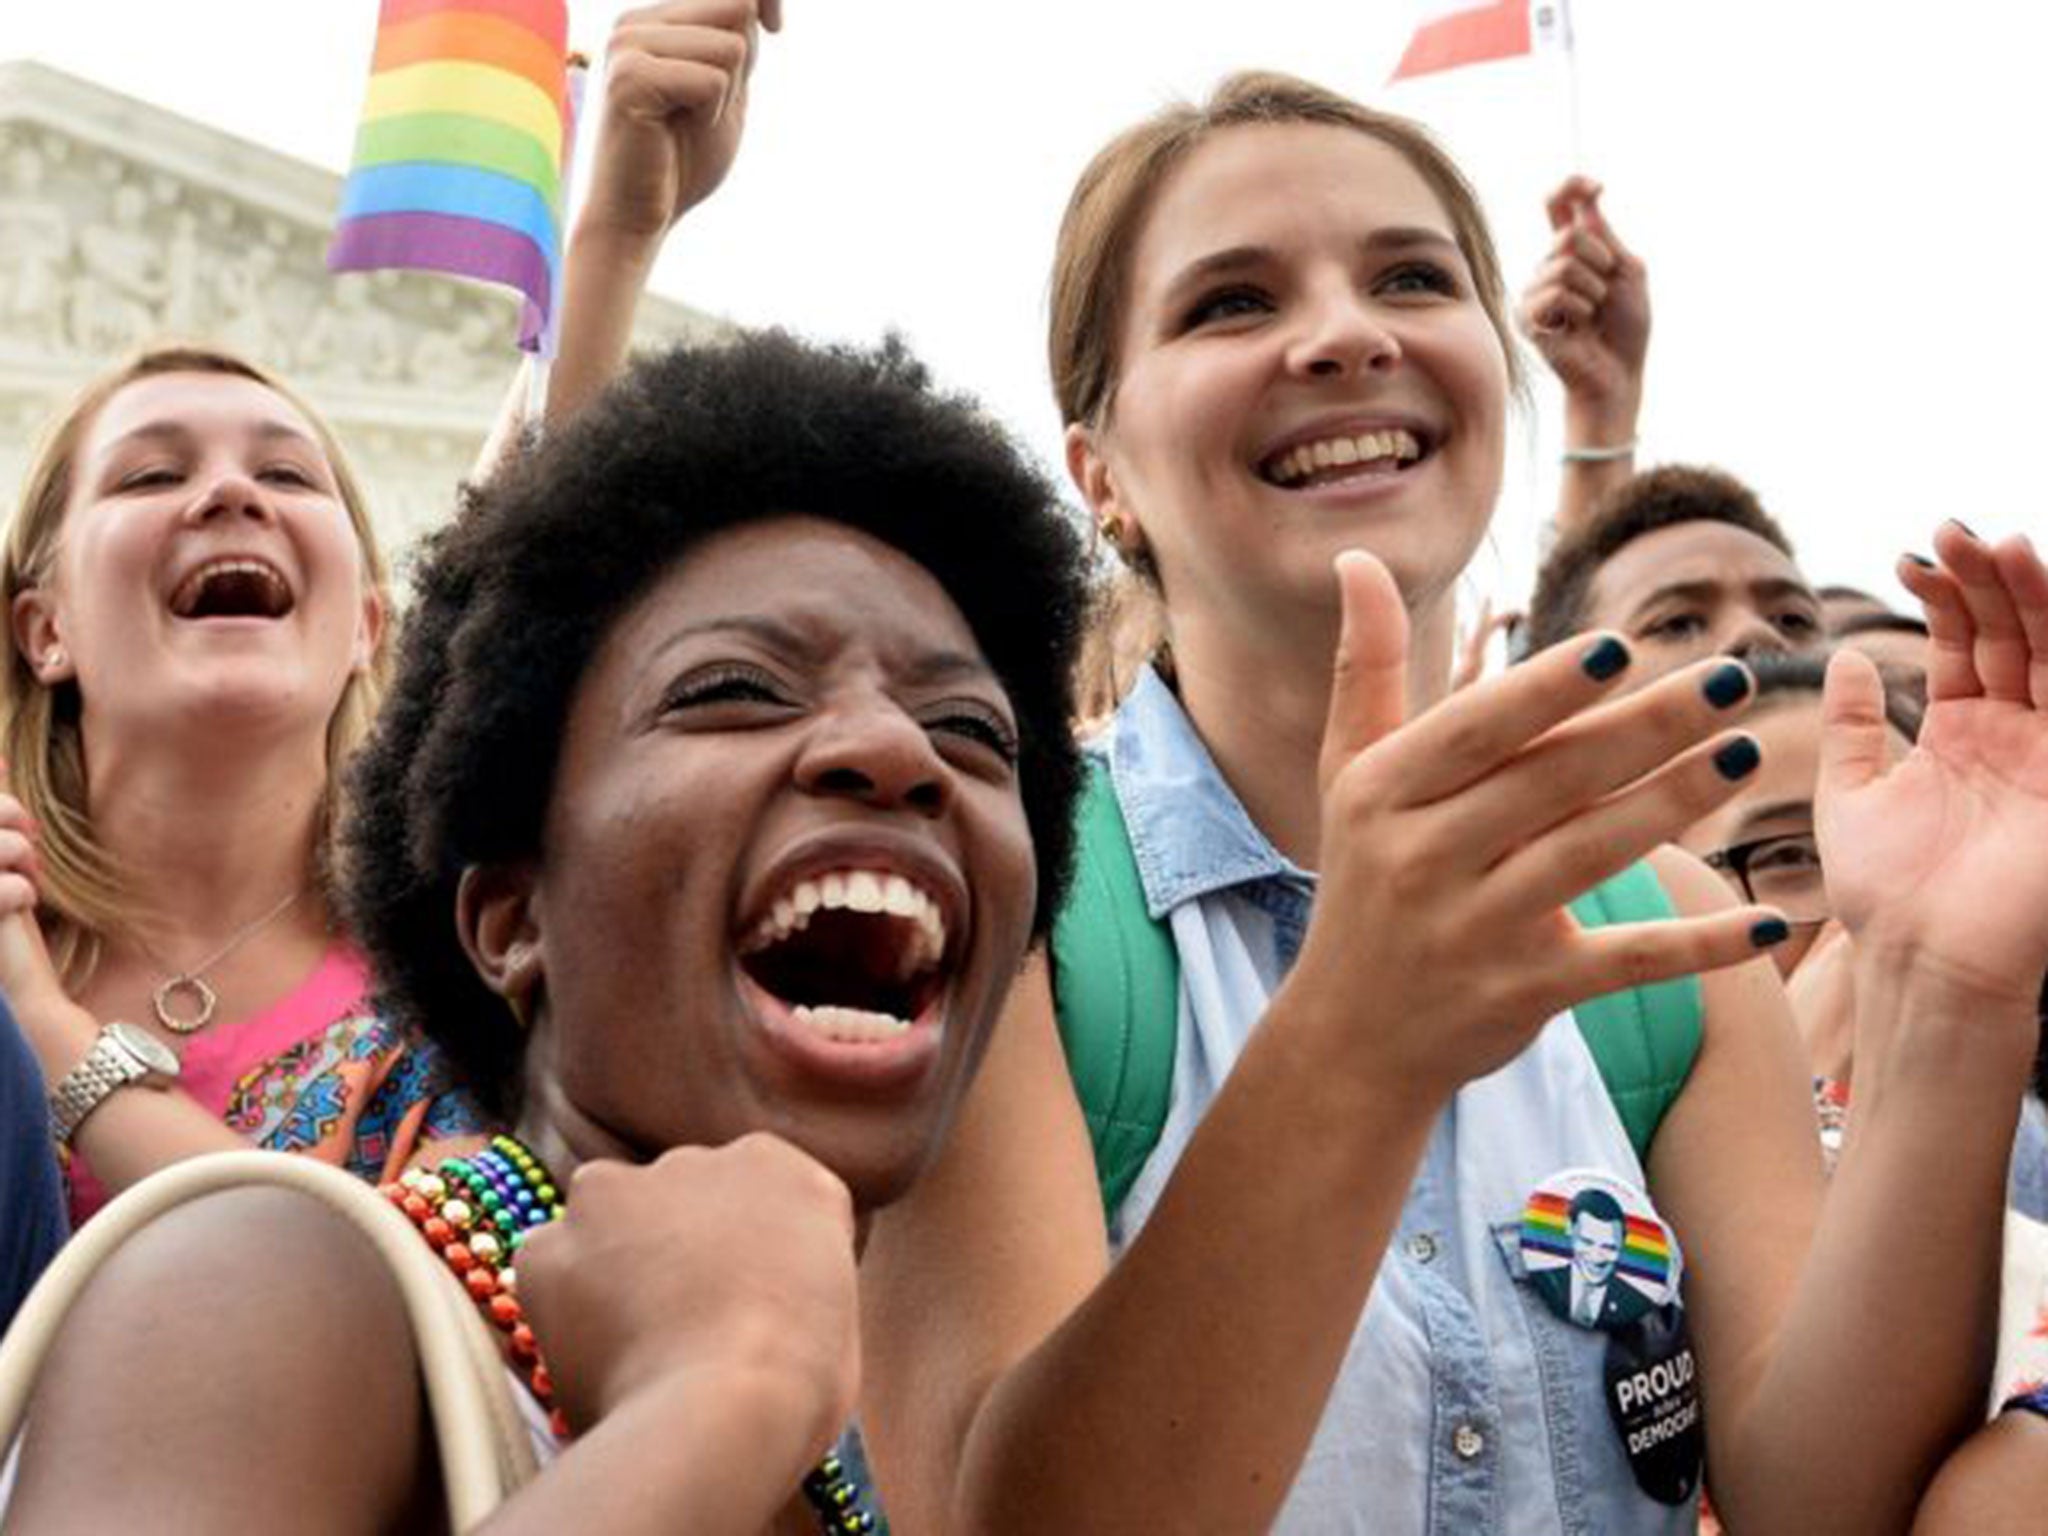 People celebrate outside the Supreme Court in Washington, DC on June 26, 2015 after its historic decision on gay marriage.